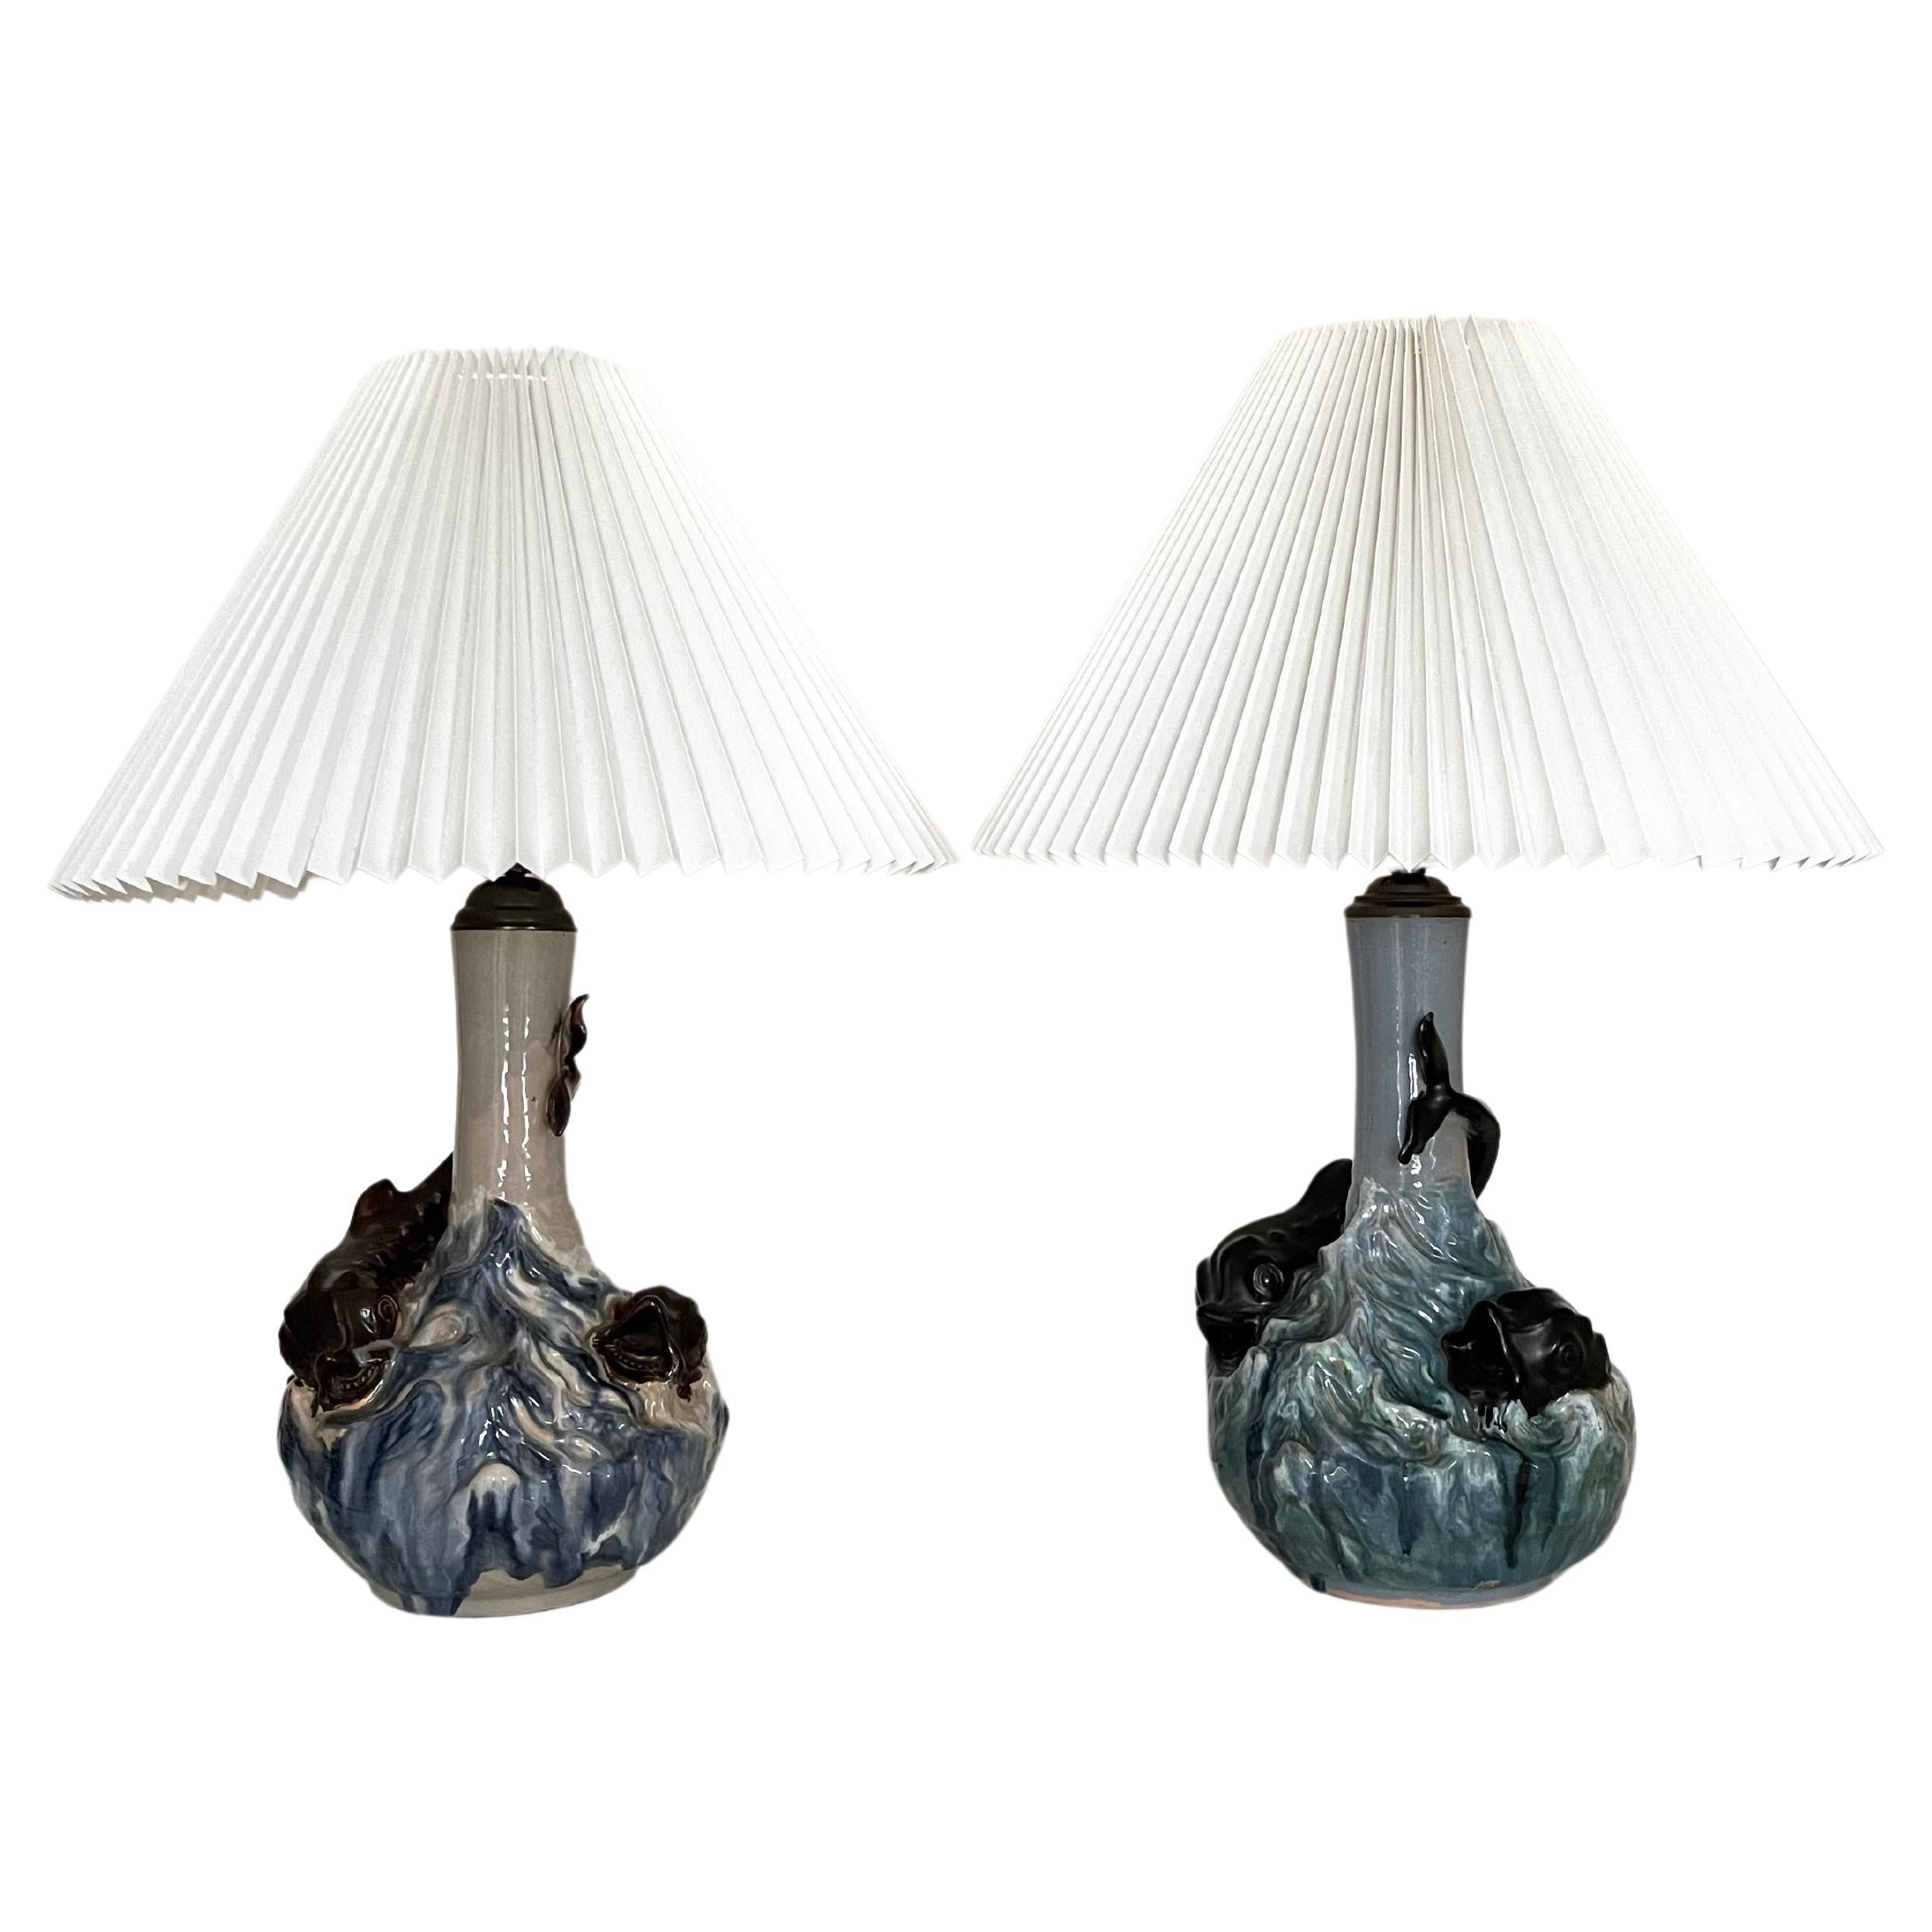 Pair of rare 1900s Danish ceramic table lamps by Hans Ancher Wolffsen Søholm For Sale